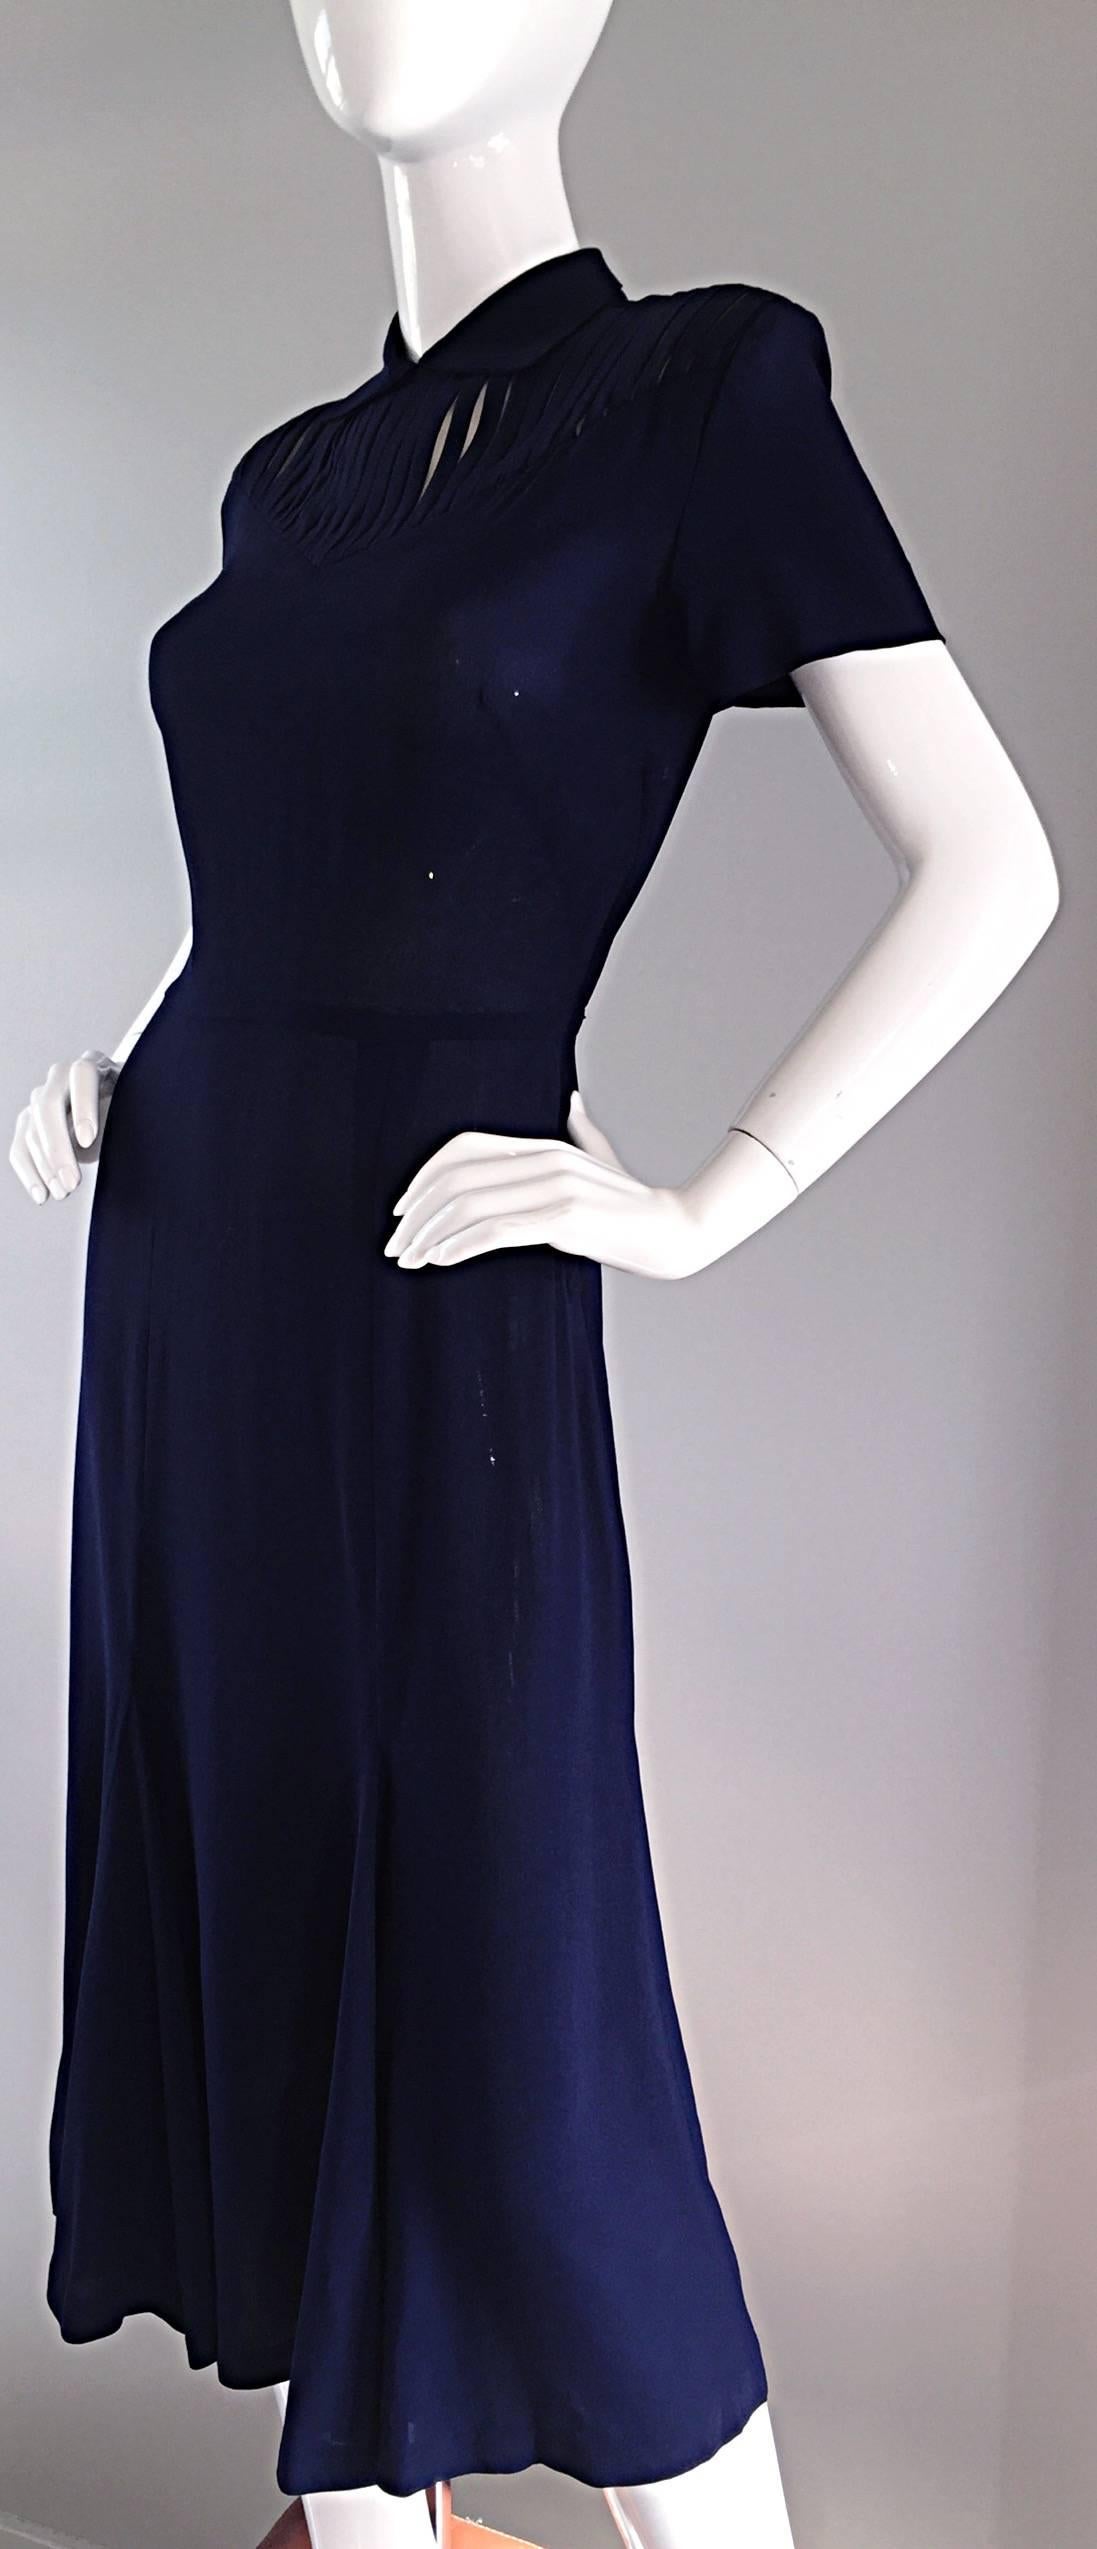 Chic 1940s 40s Navy Blue Crepe + Nude Illusion Vintage Day Dress 1